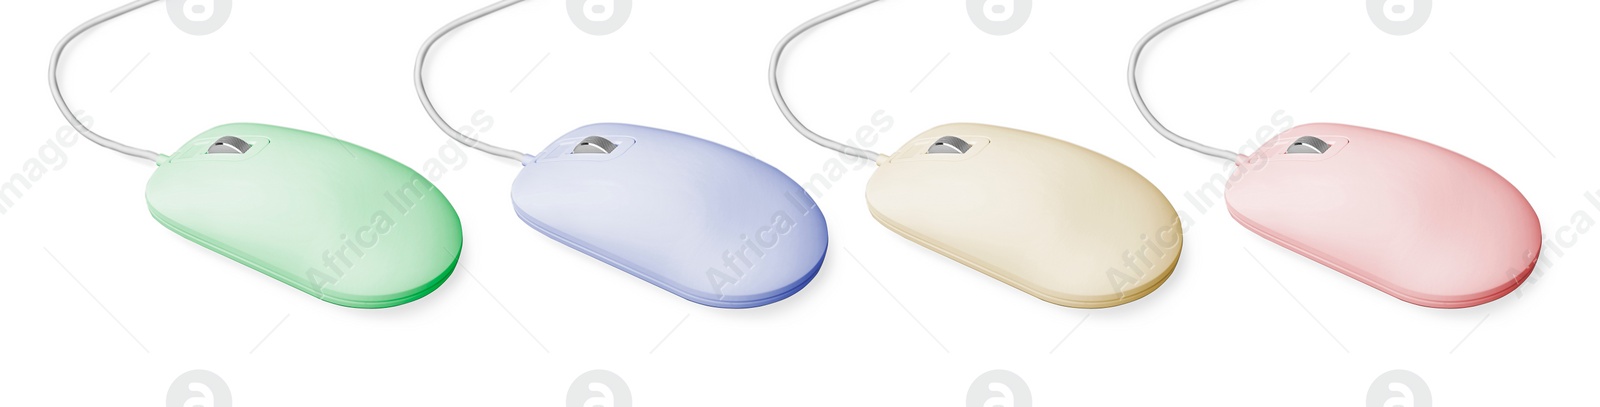 Image of Modern computer mouse on white background, different color variants. Banner design